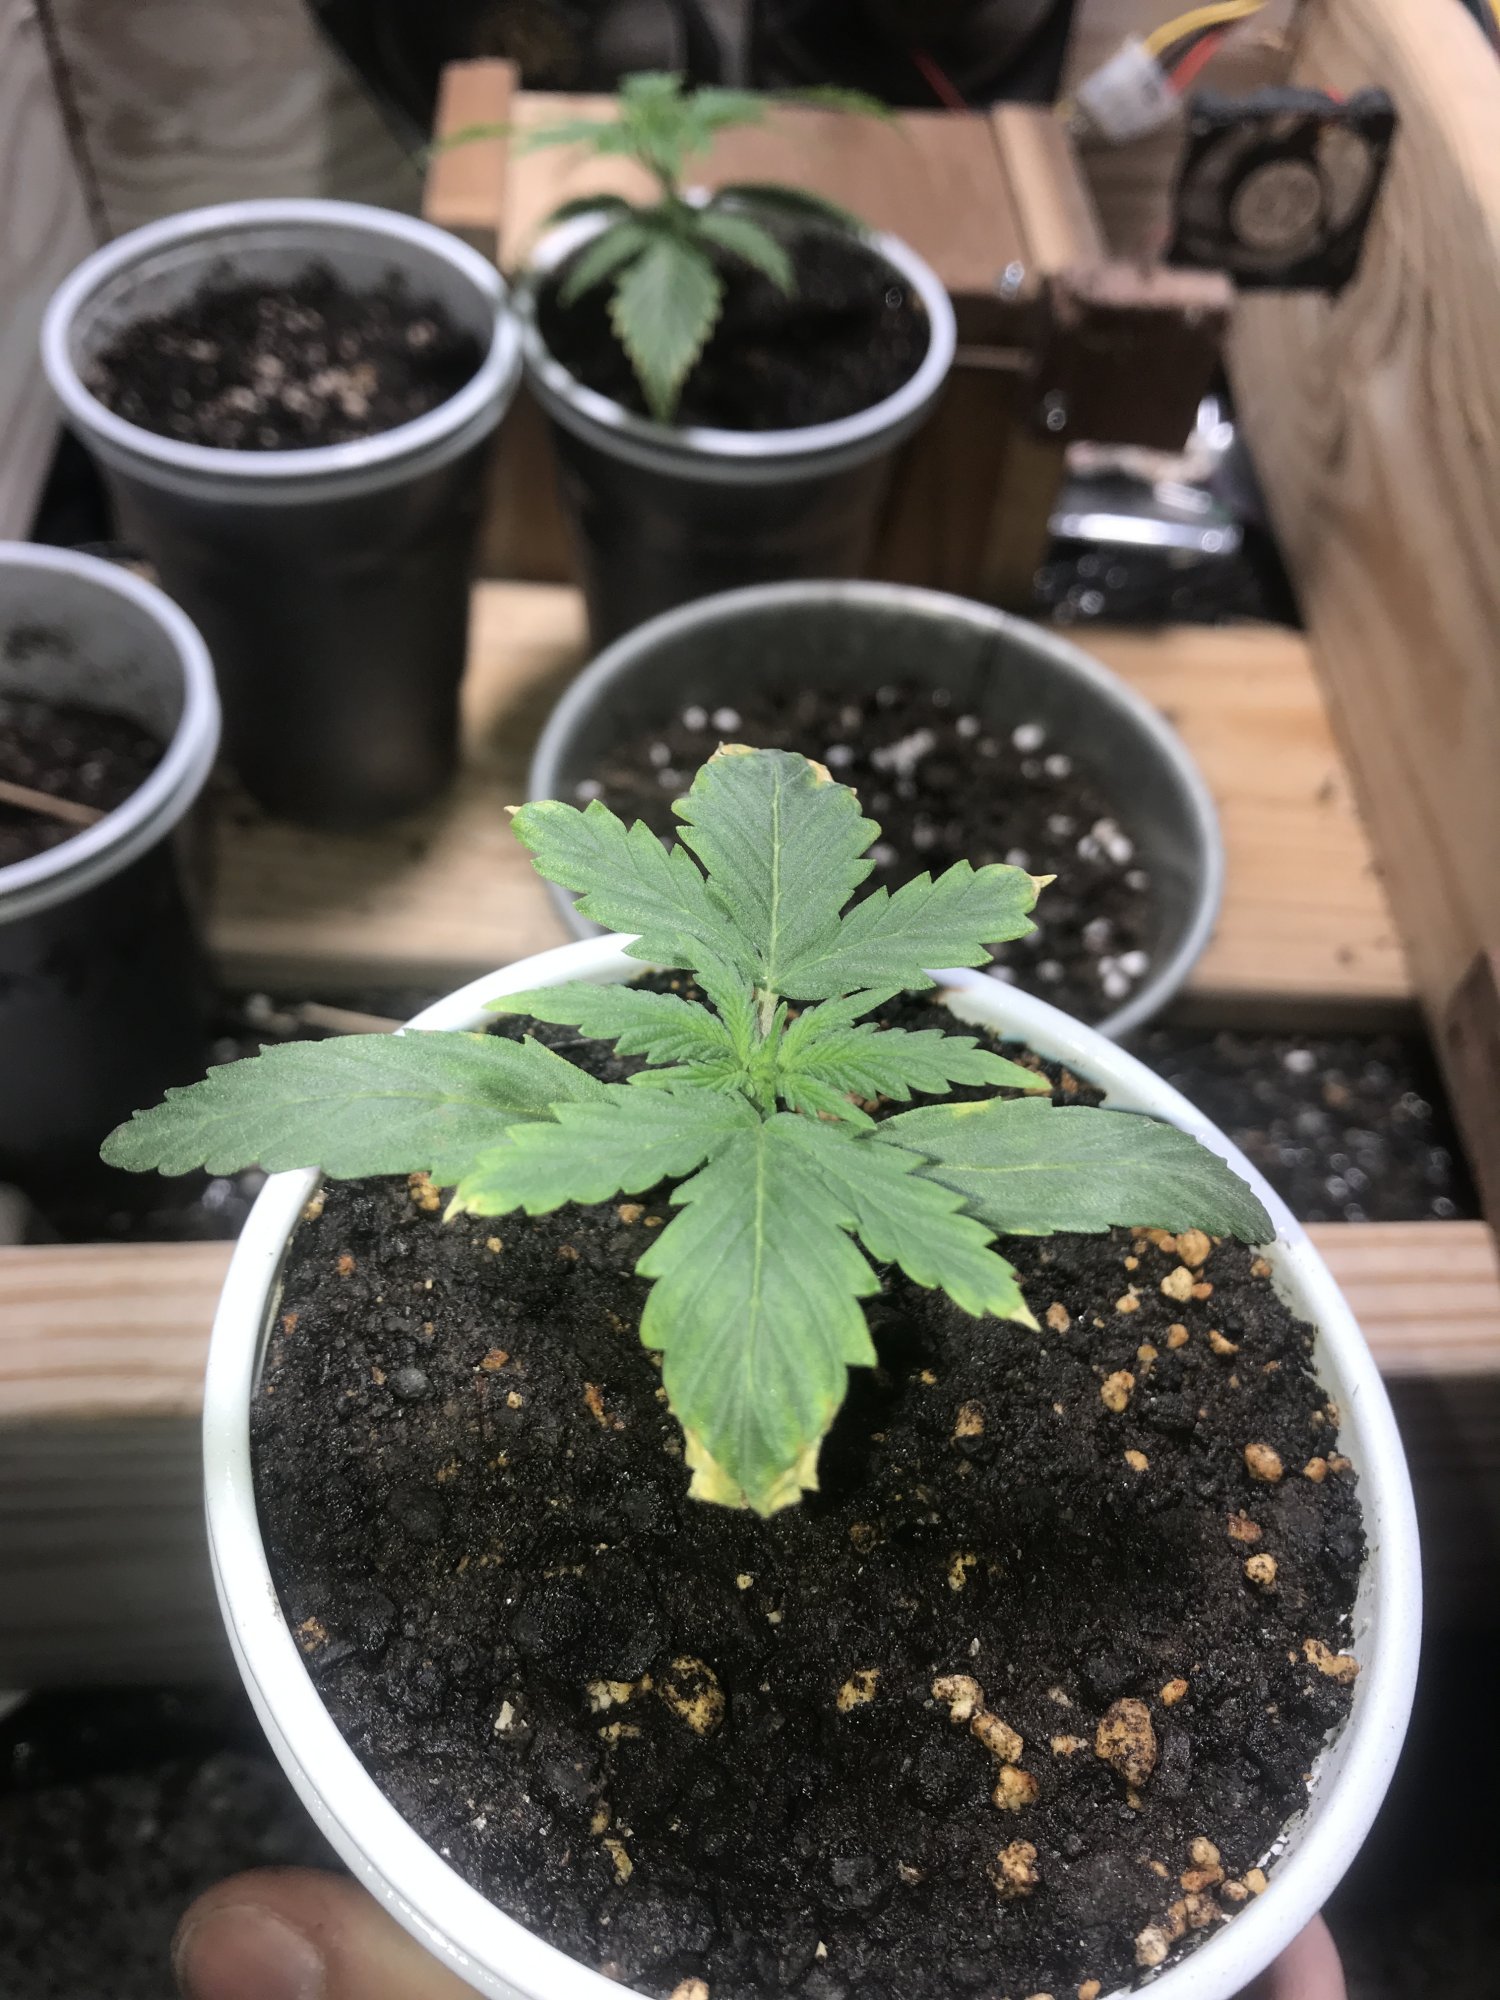 Can some one help me identify the problem with my seedlings